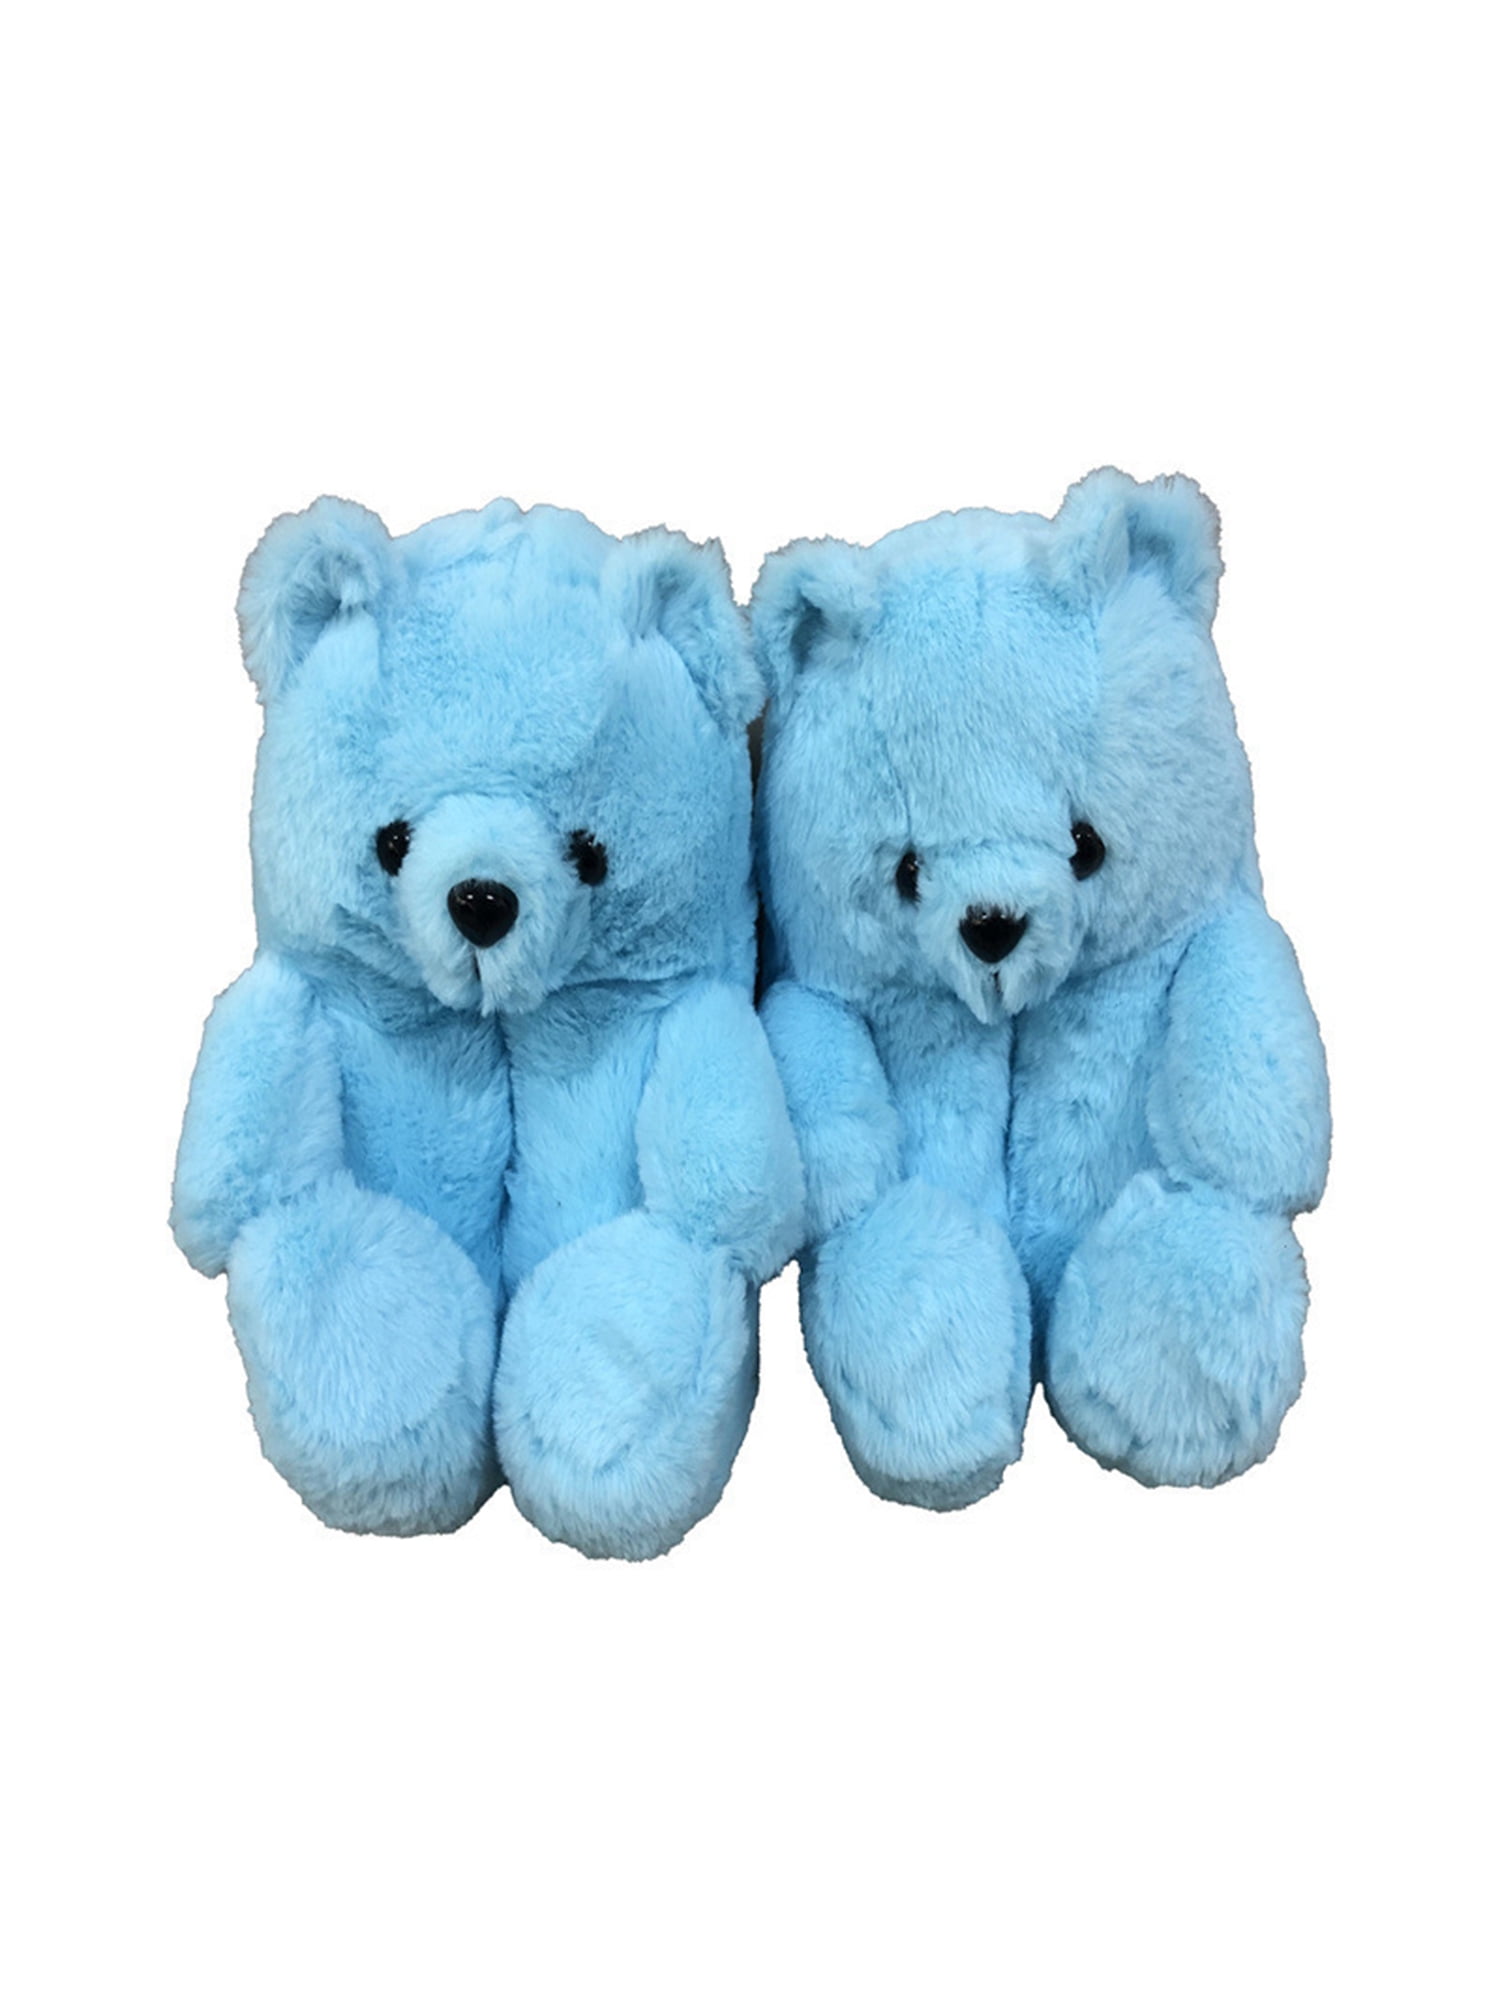 Details about   Teddy Bear House Slippers Women Homes Indoor Soft Anti-slip Cute Slippers Women 